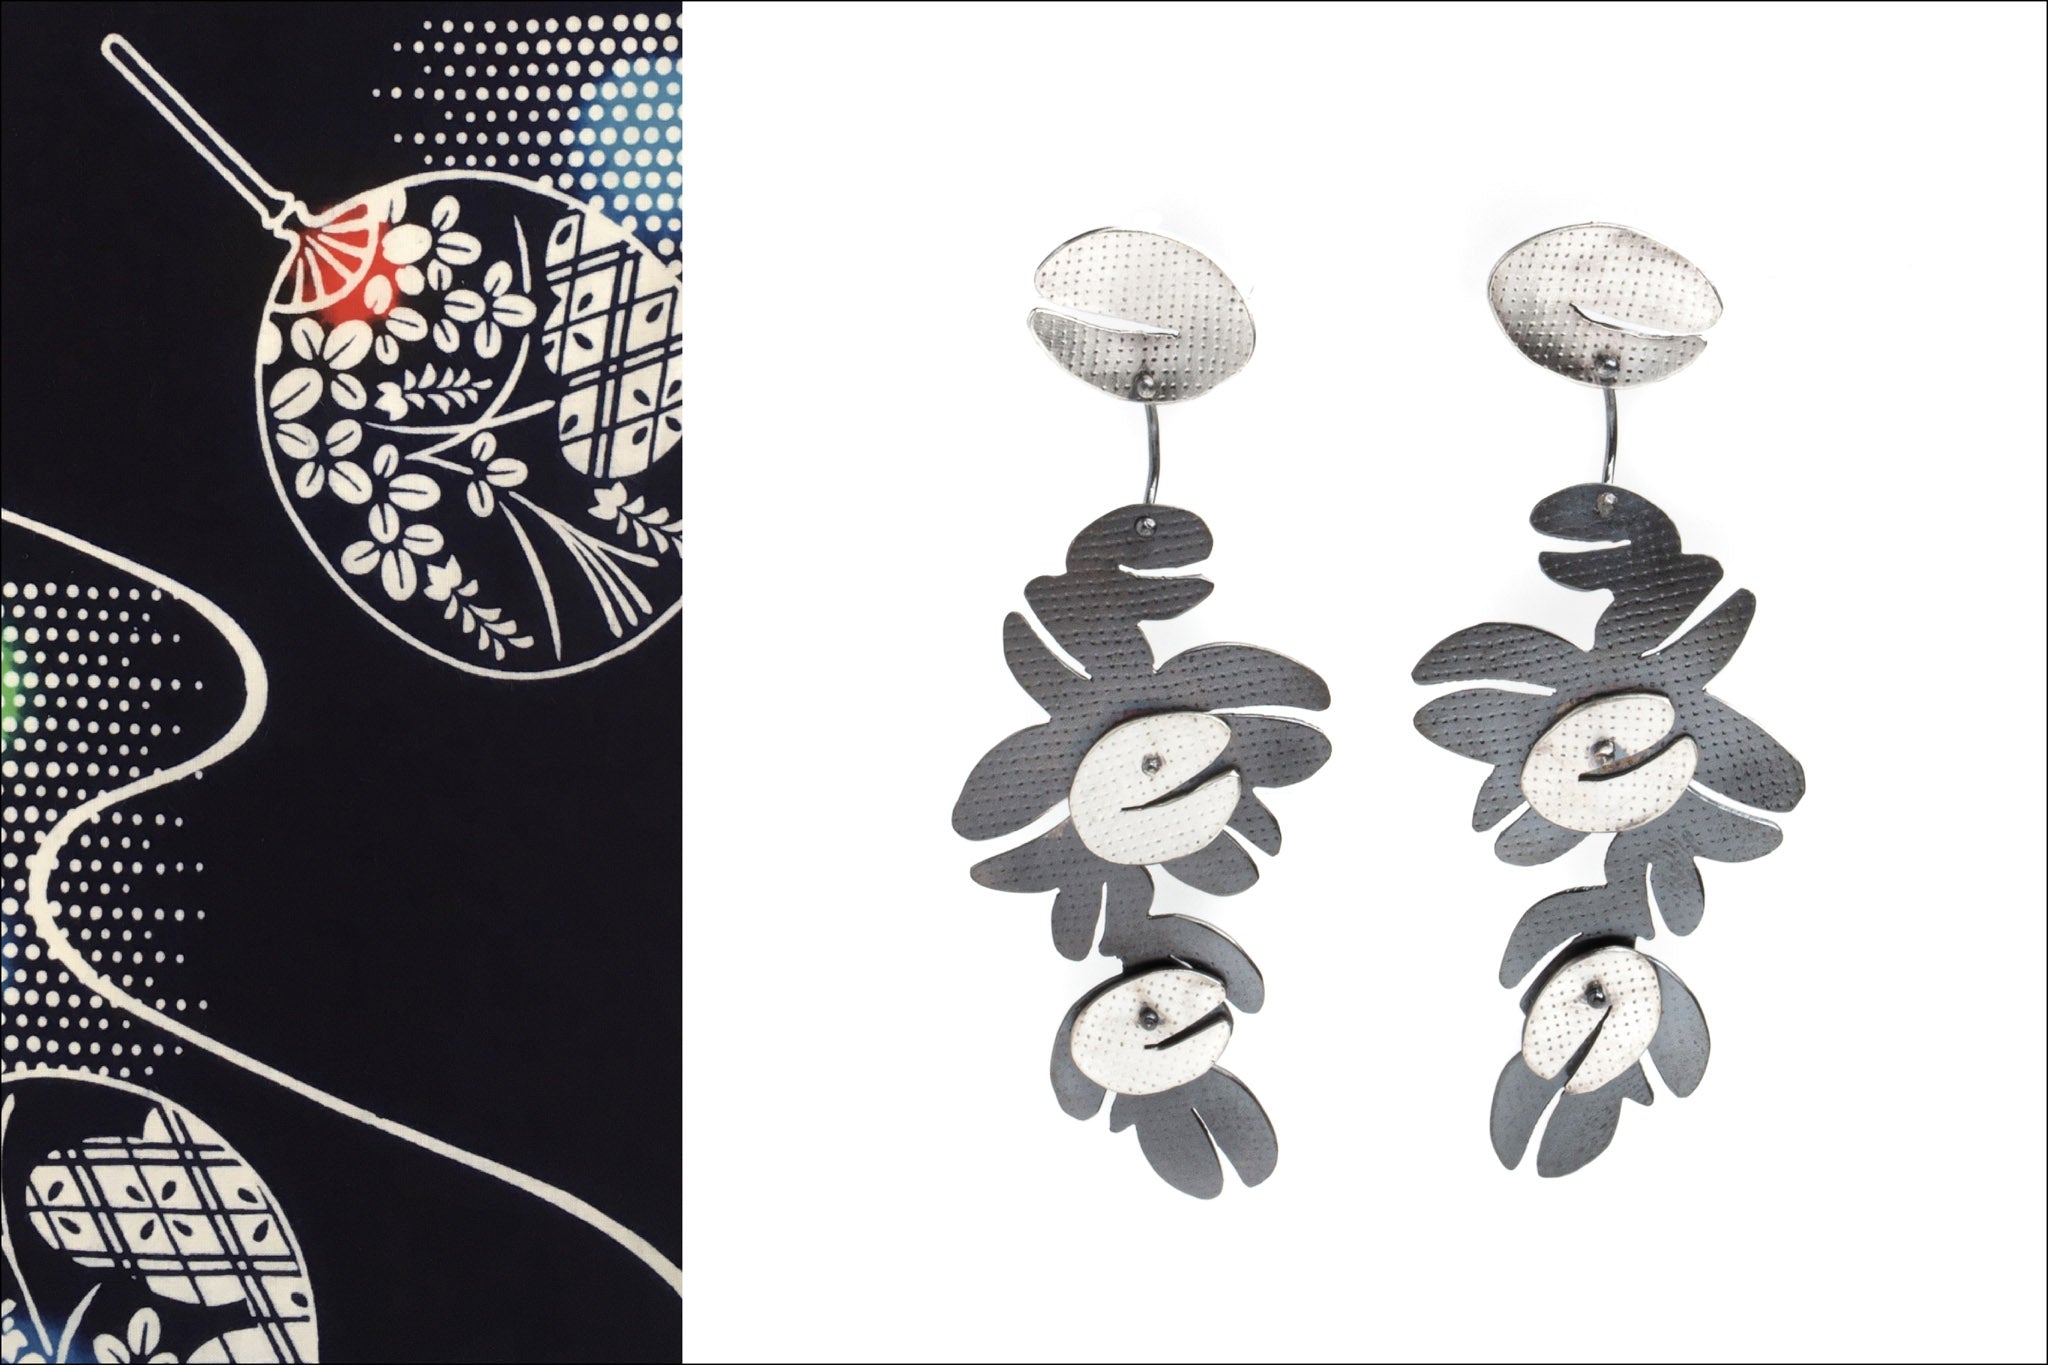 Flowering Clover, earrings by Jane Pellicciotto for the Yukata Jewelry Show 2022—a creative collaboration between Okan Arts and Danaca Design